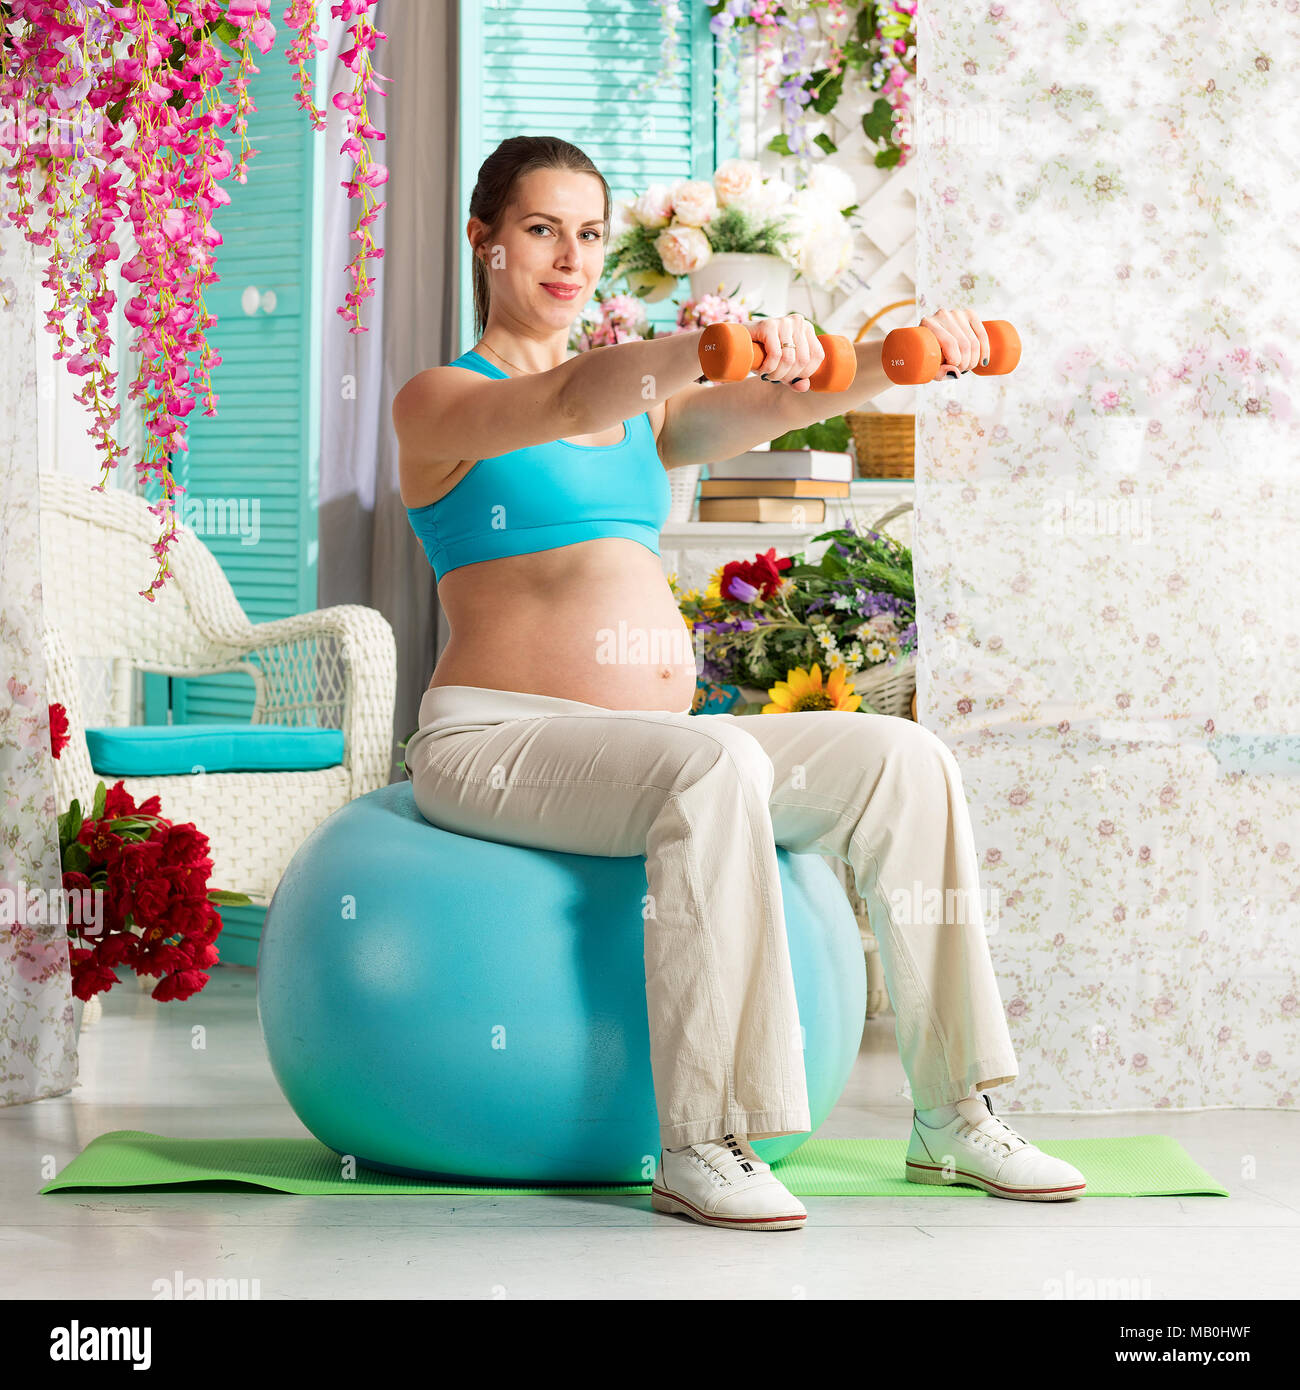 Pregnant woman during workout Stock Photo